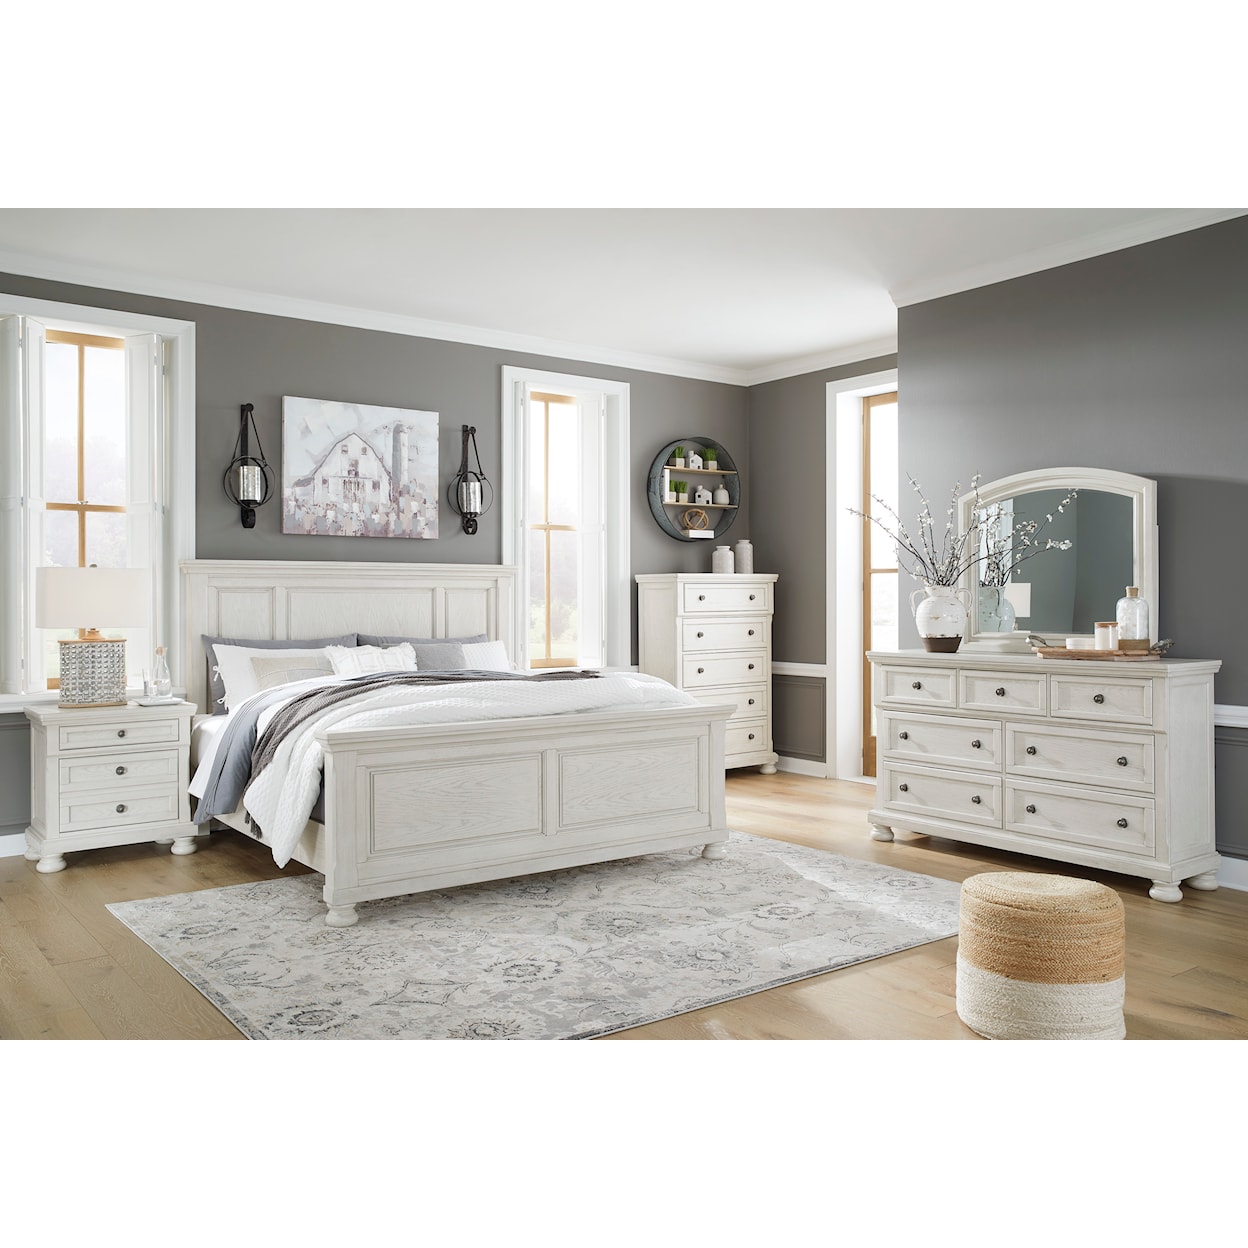 Signature Design by Ashley Robbinsdale Queen Bedroom Group